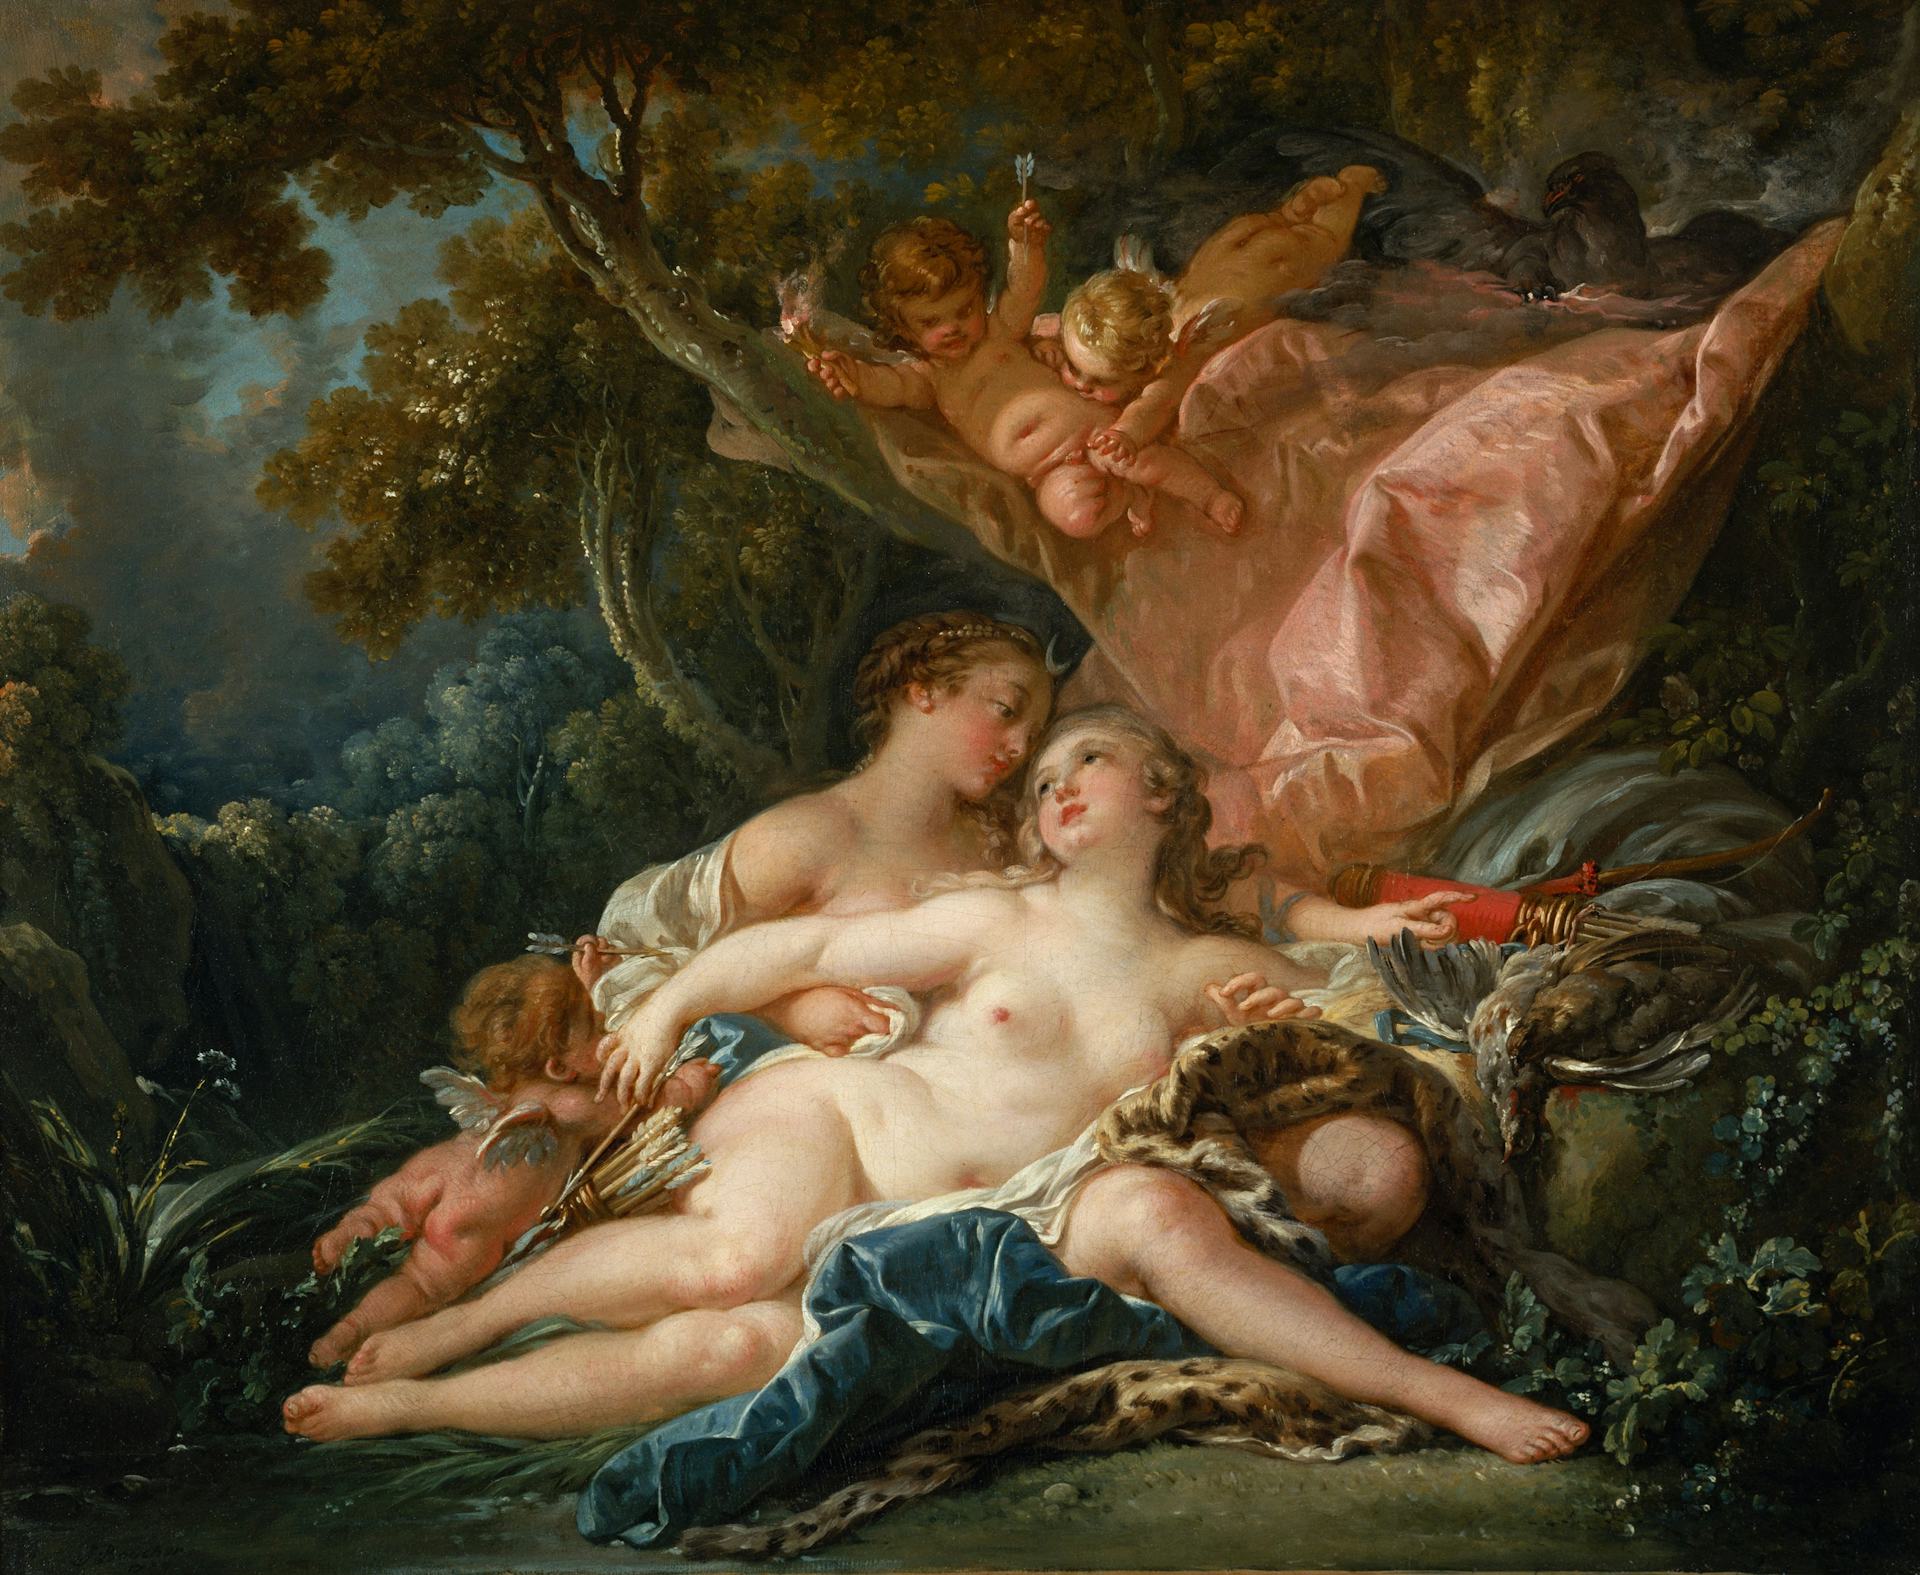 The Nymph Callisto Seduced by Jupiter in the Guise of Diana